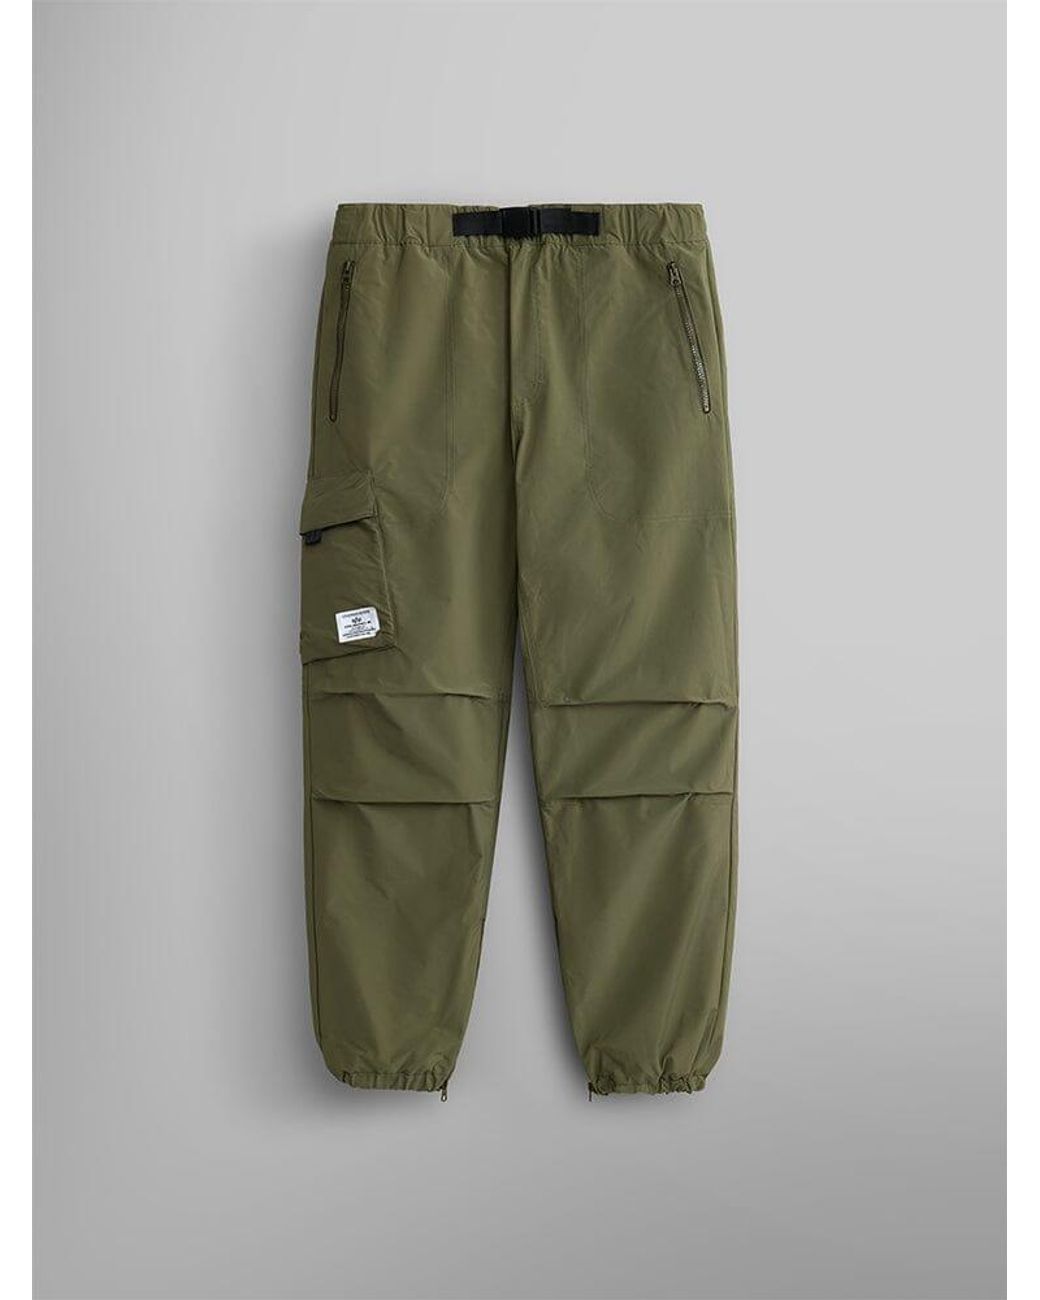 Green | Alpha in Utility JOGGER for Men Lyst Industries